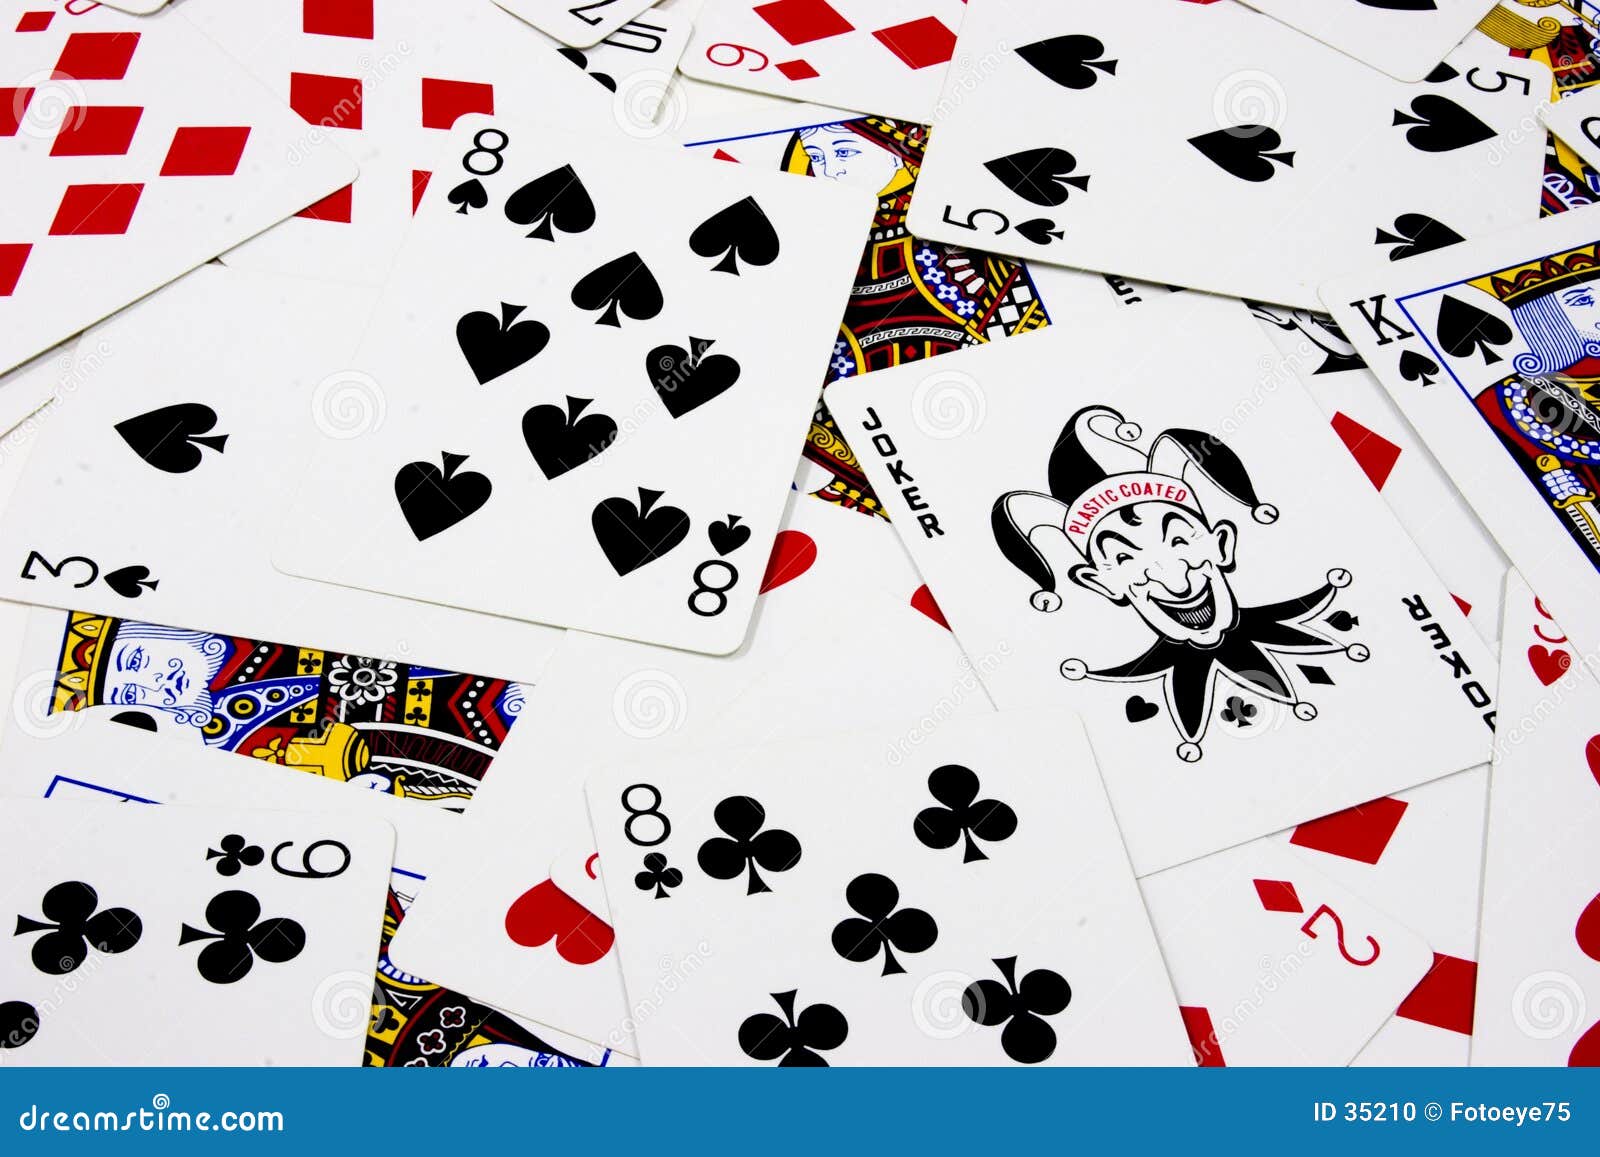 Poker Playing Cards stock photo. Image of gamble, loser - 35210